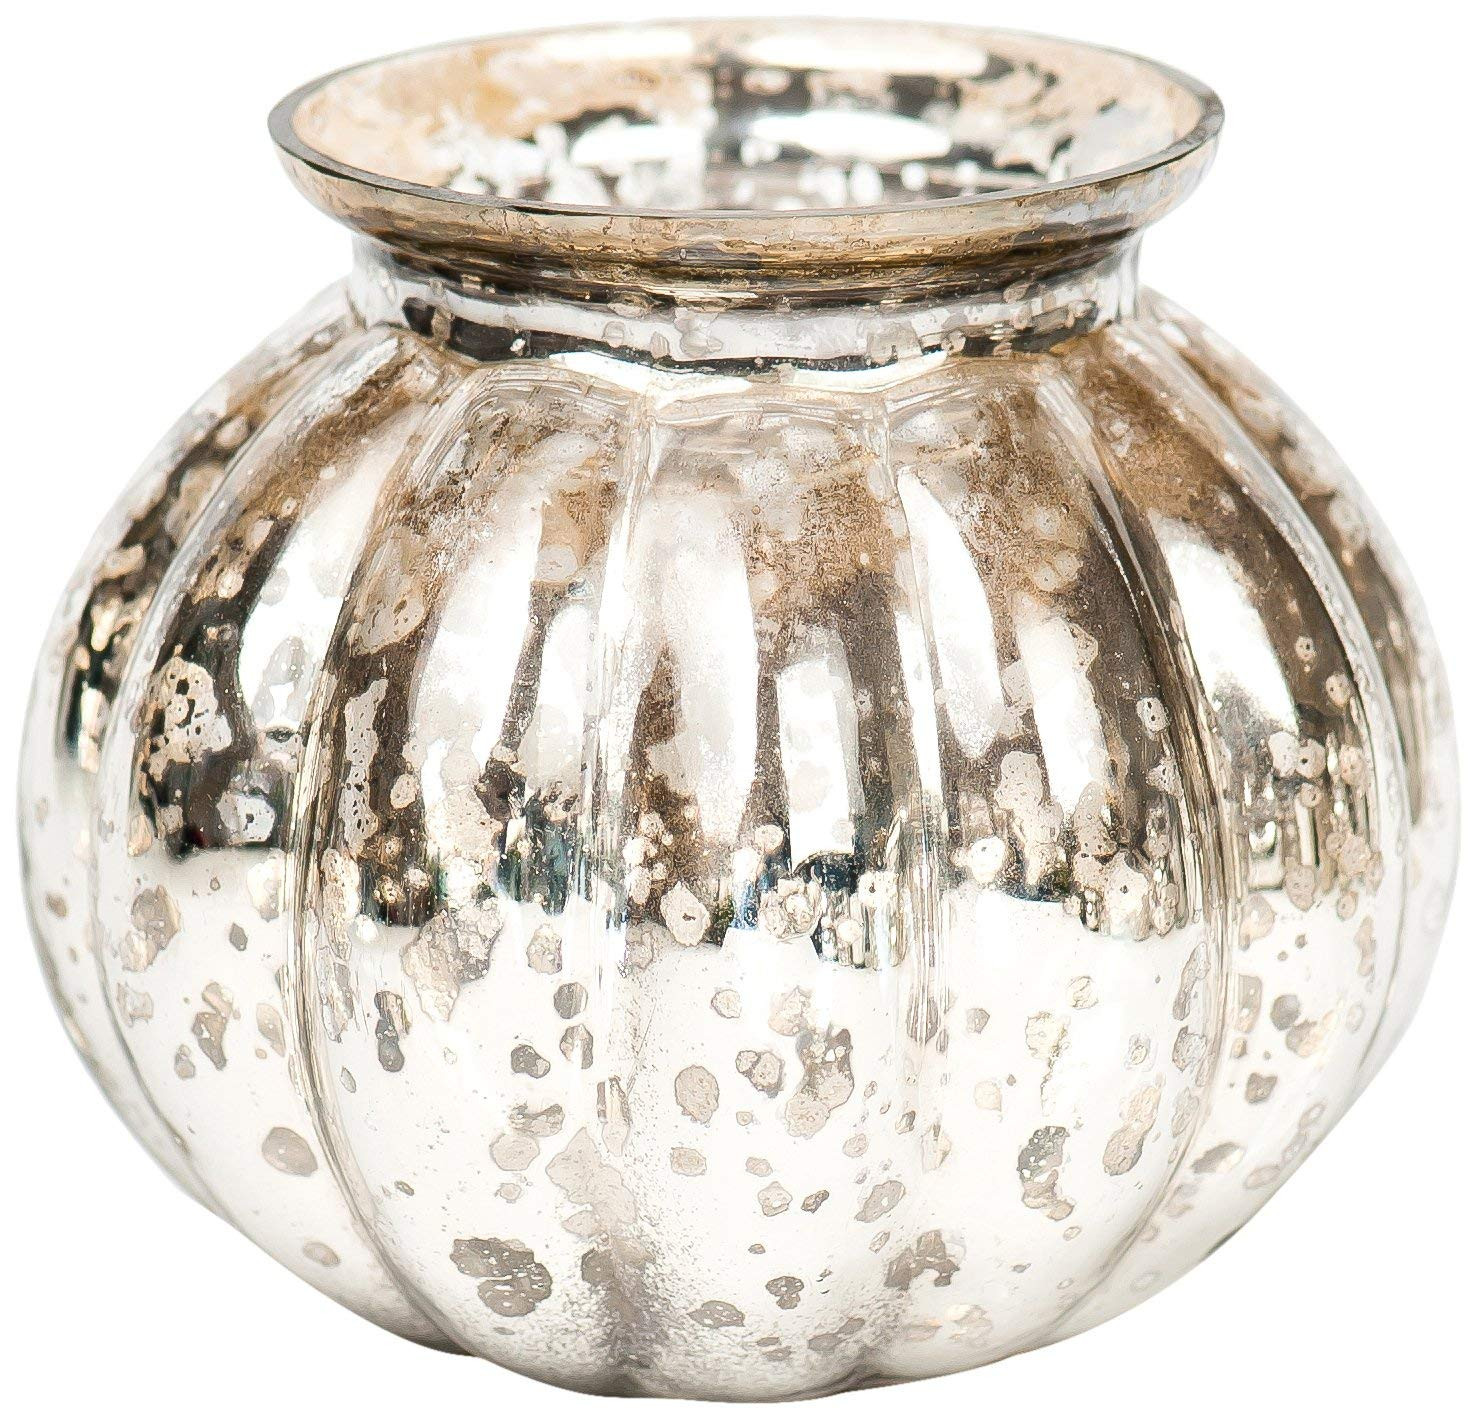 19 Lovely Antique Chinese Glass Vase 2024 free download antique chinese glass vase of insideretail mercury glass mini round vase silver 13 cm set of 3 in insideretail mercury glass mini round vase silver 13 cm set of 3 amazon co uk kitchen home